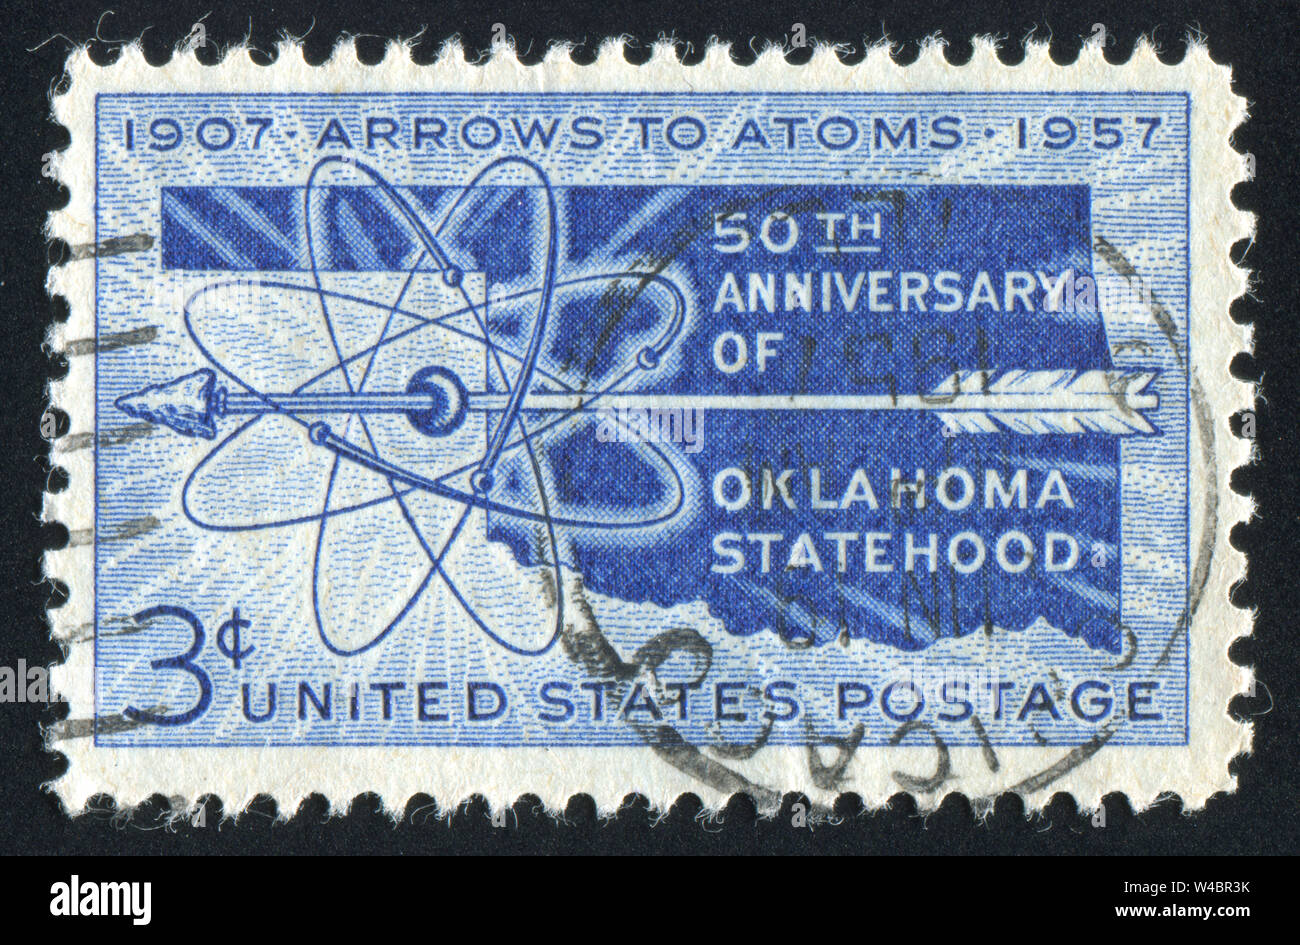 UNITED STATES - CIRCA 1957: stamp printed by United states, shows Map of Oklahoma, Arrow and Atom Diagram, circa 1957 Stock Photo